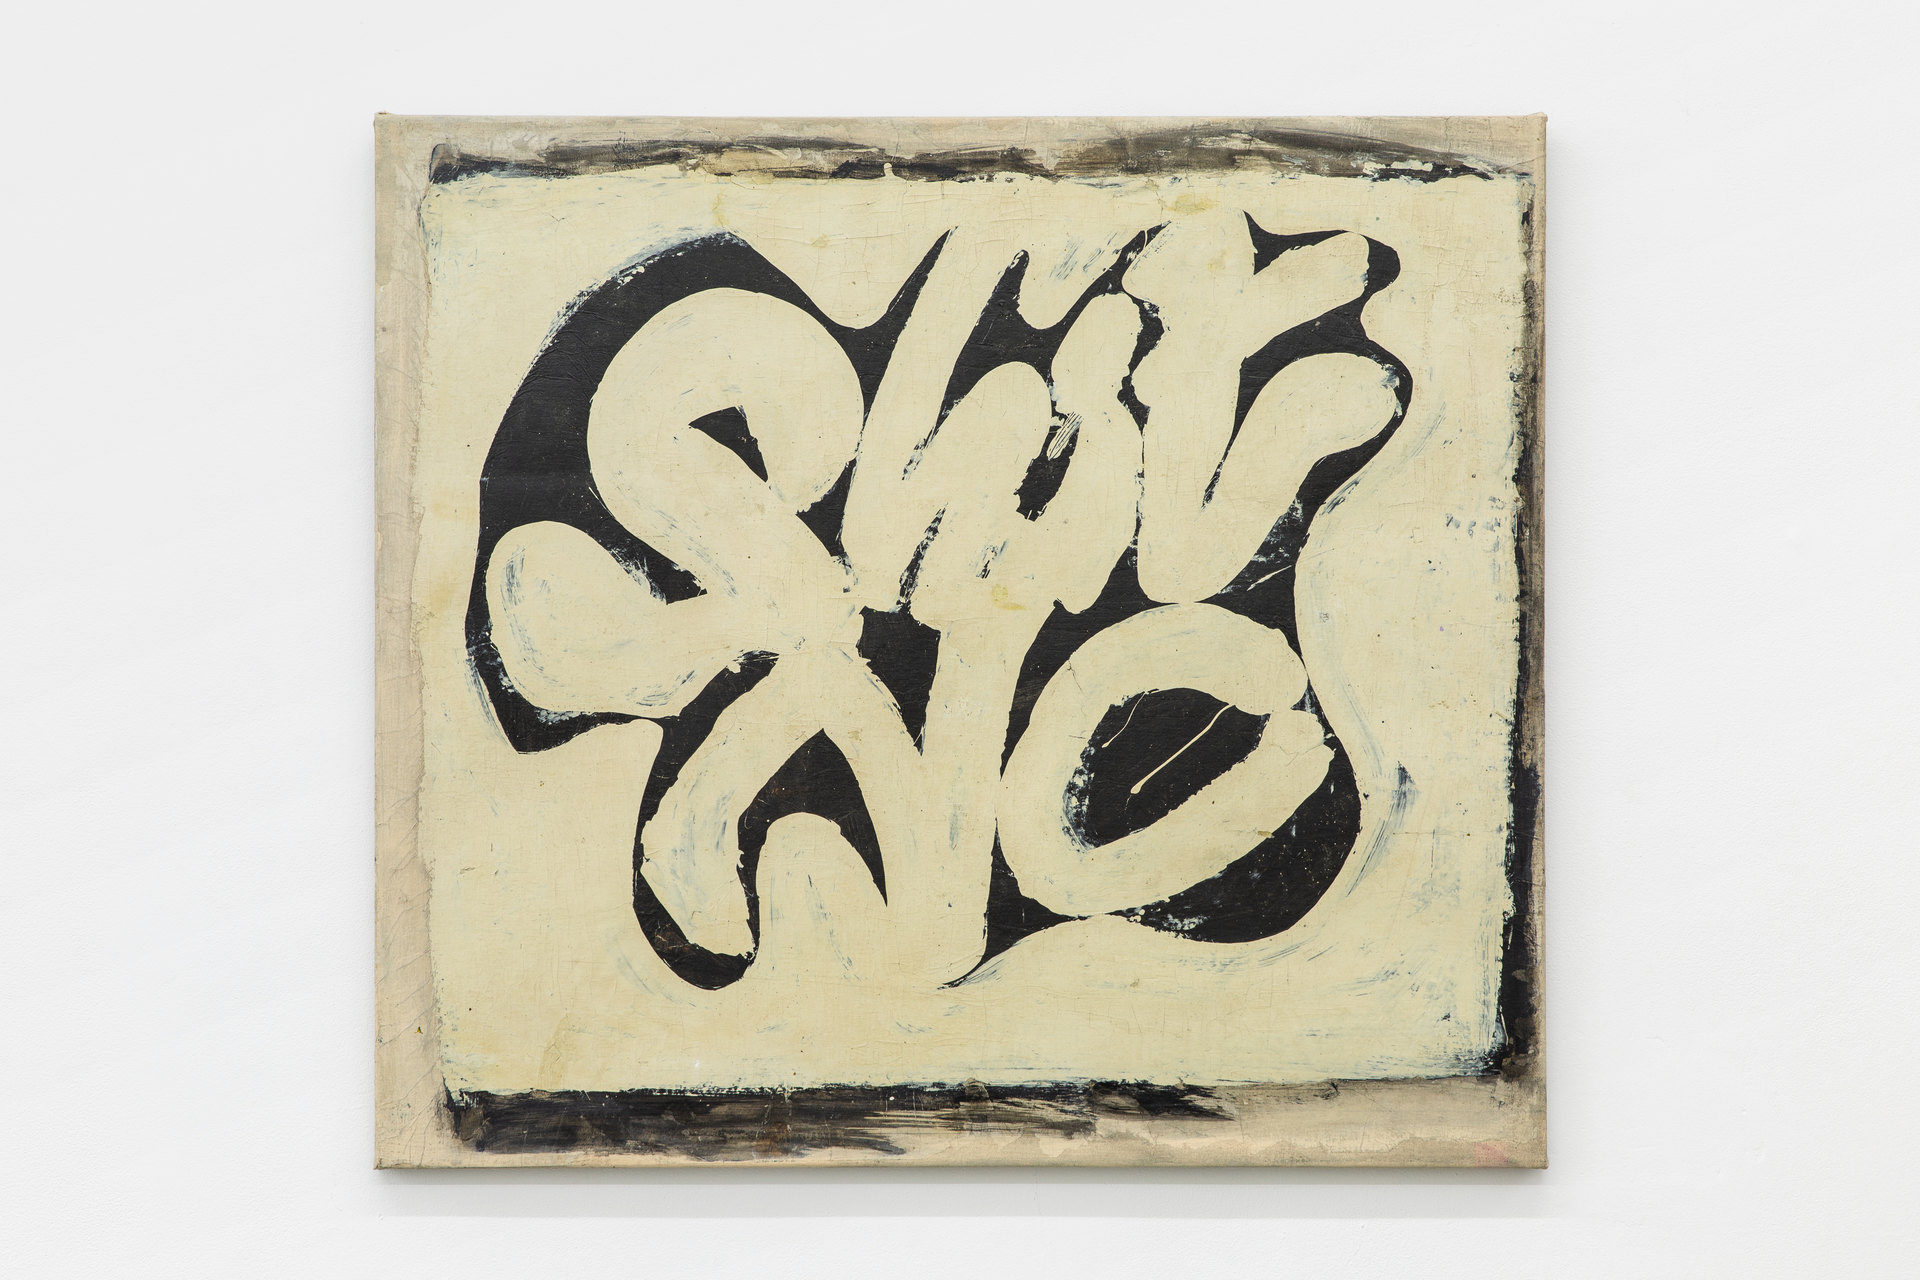 Boris Lurie, 'Shit NO (Black and White)', c. 1969–1970, Duco on paper mounted on canvas, 91 x 102cm,  Shit and Doom - NO!art, 2019, Cell Project Space